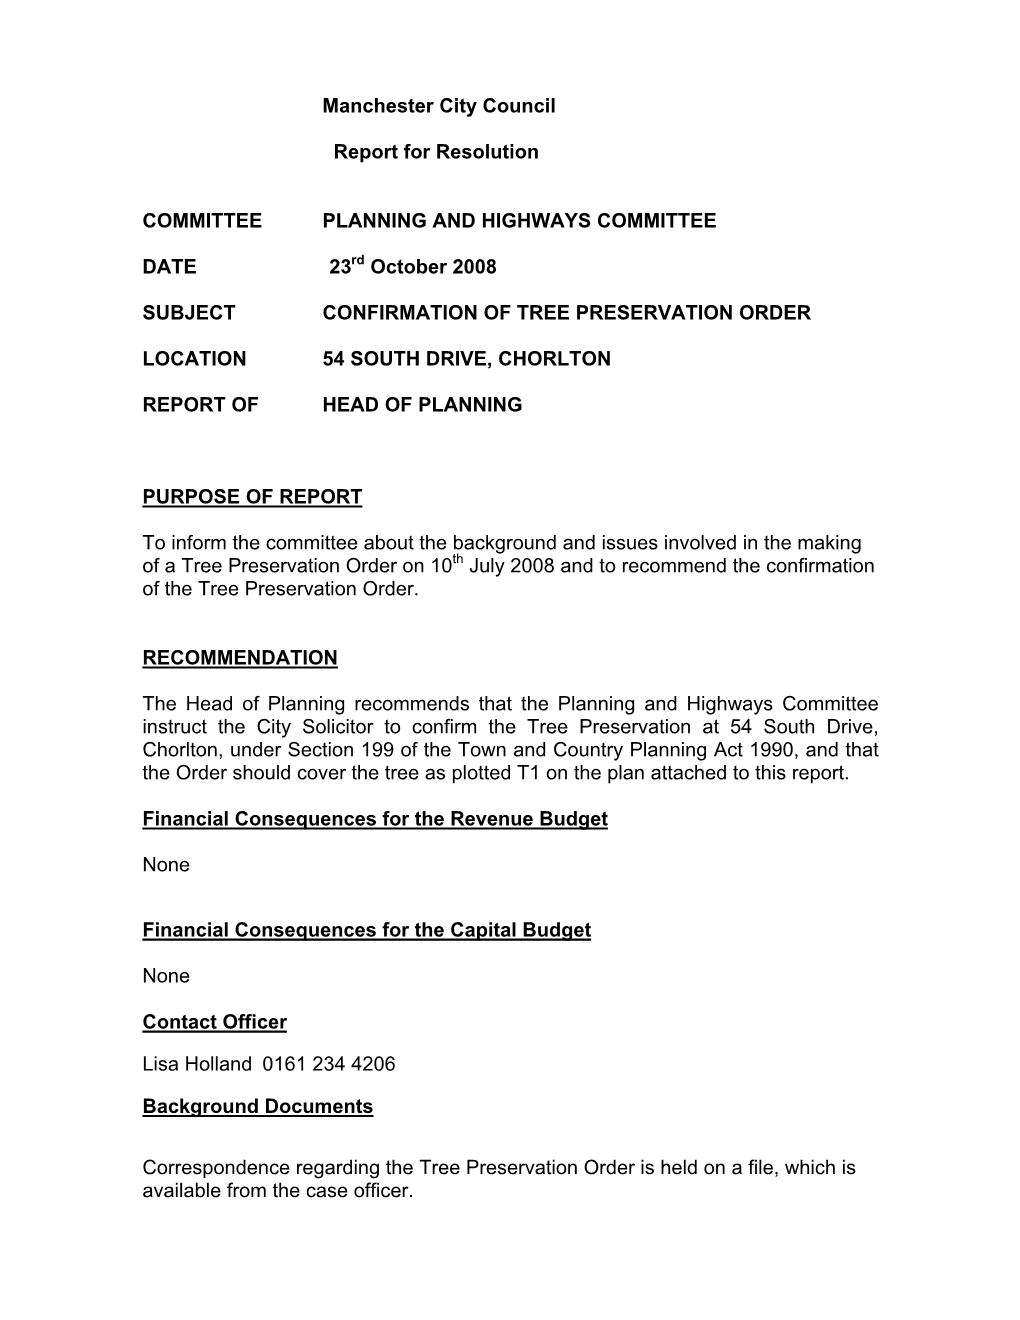 Manchester City Council Report for Resolution COMMITTEE